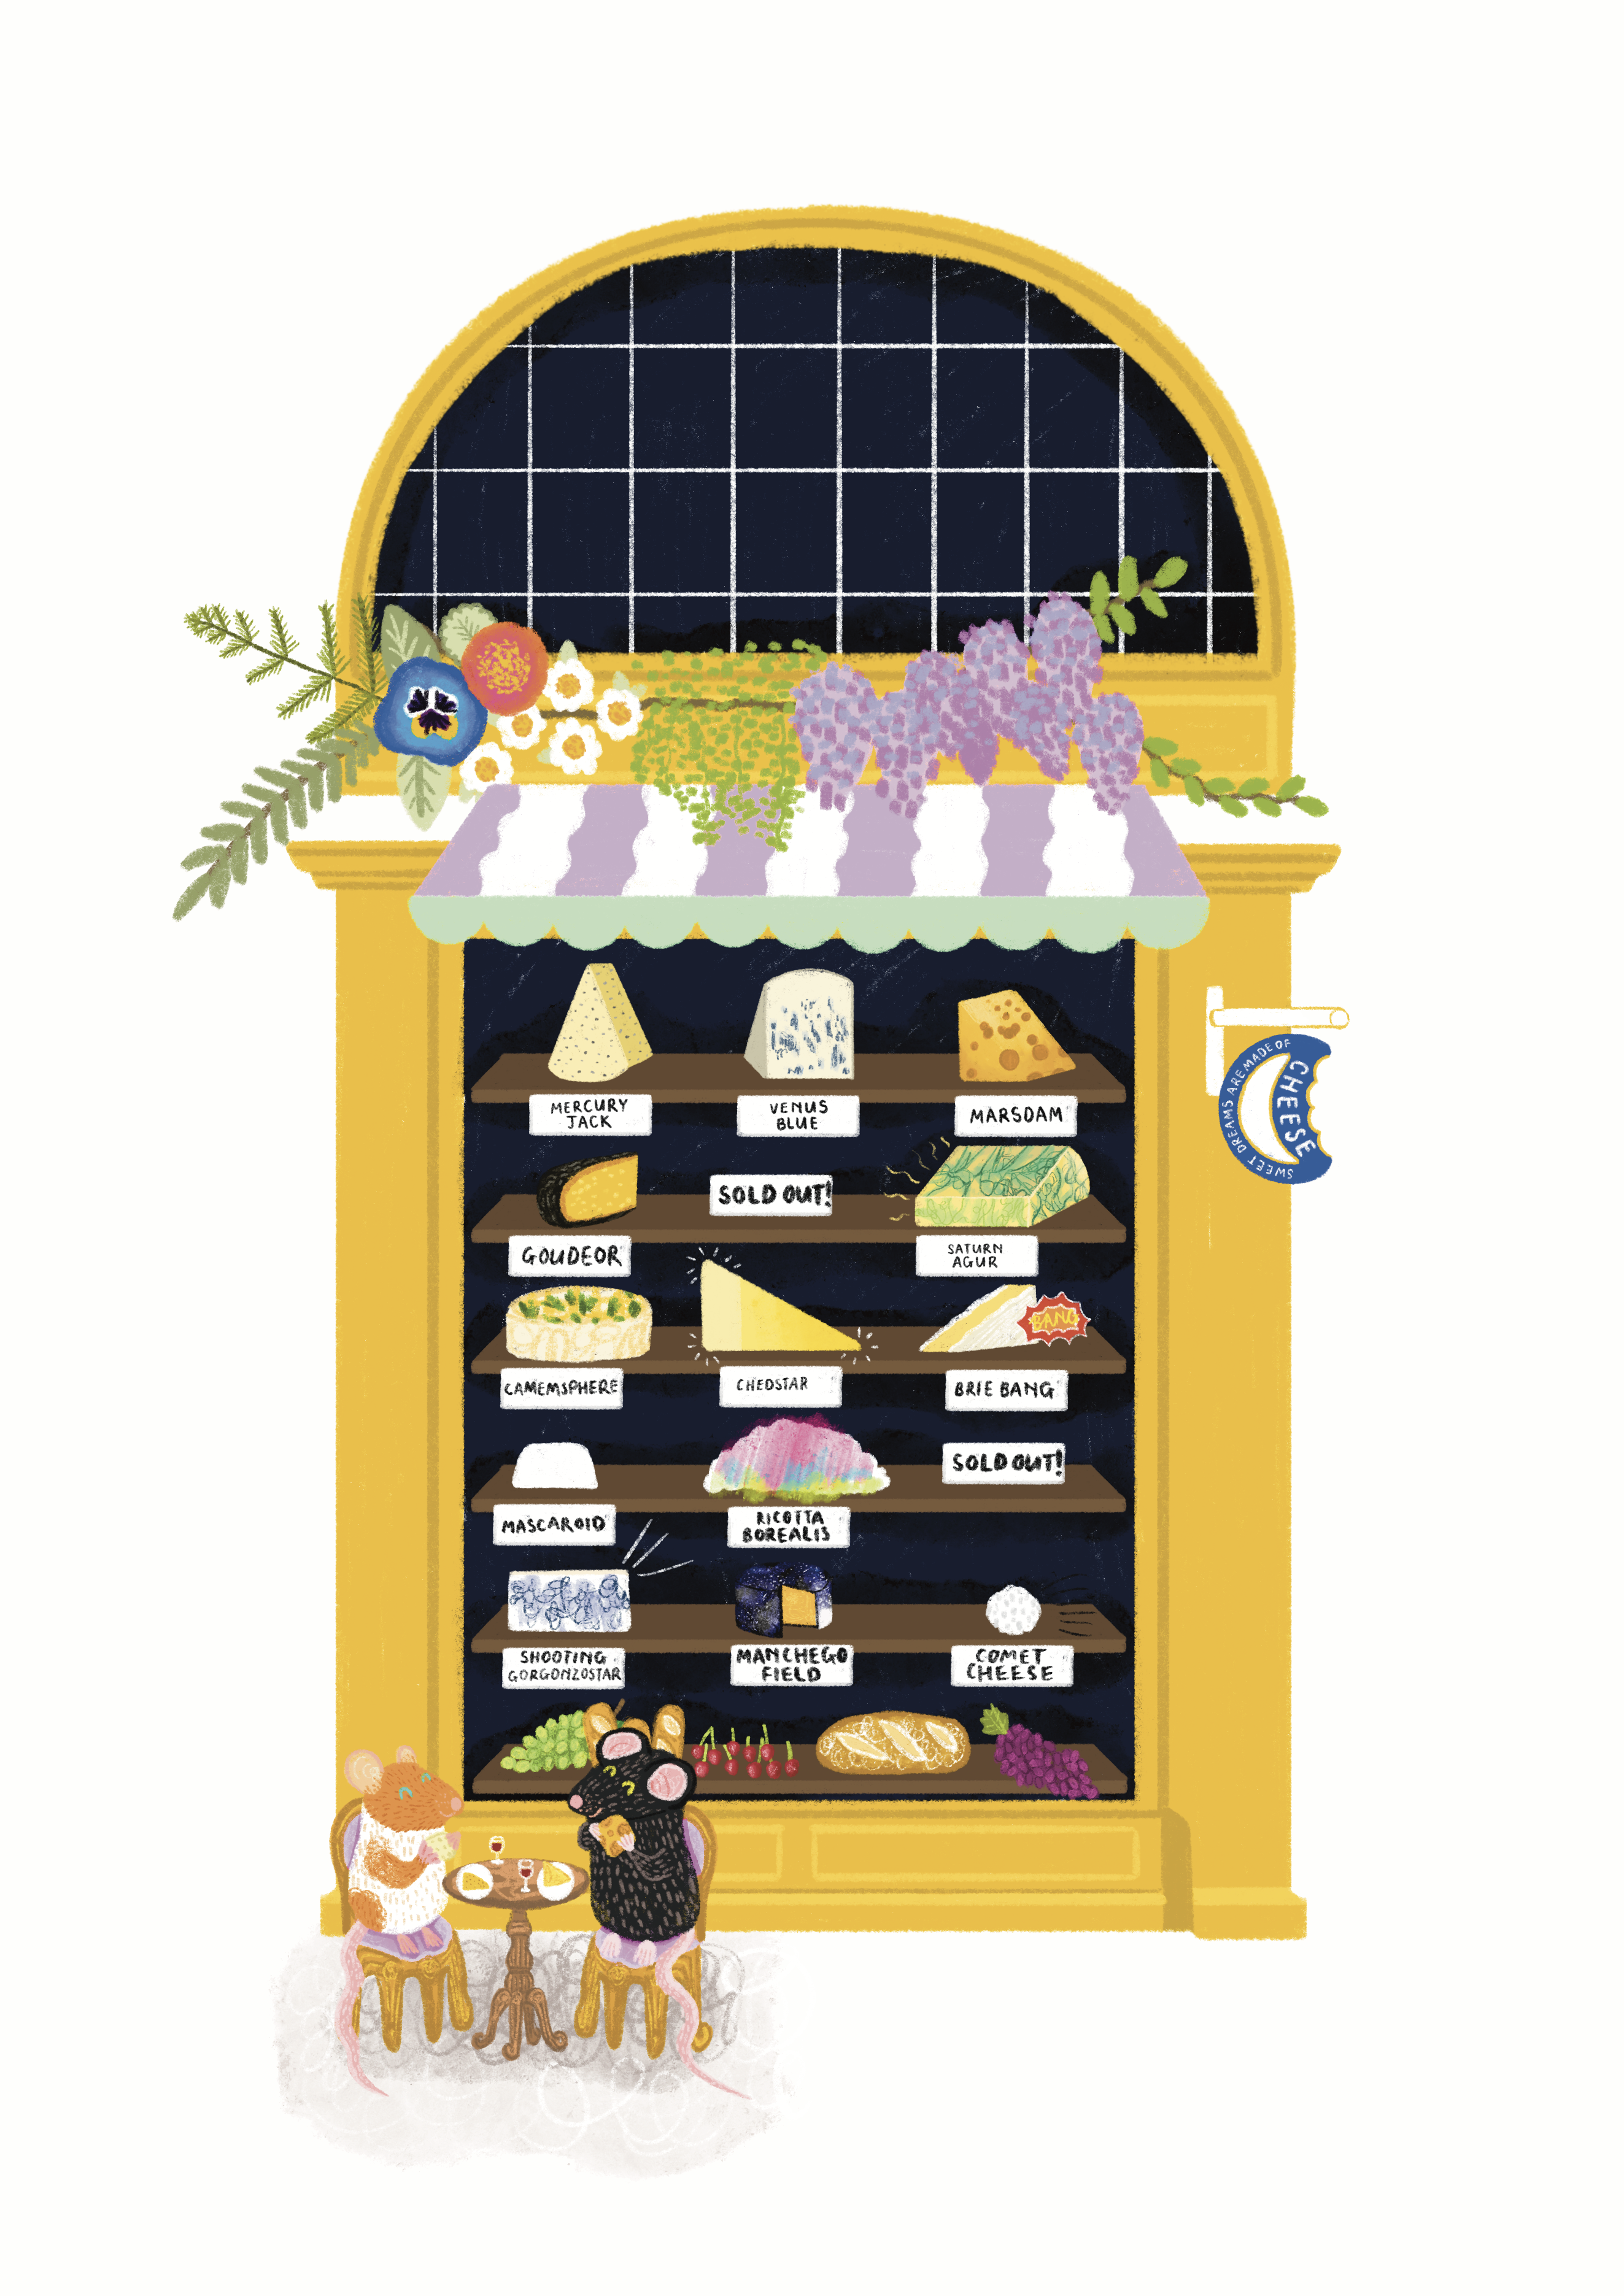 An illustration done by Hope Bullen of a yellow cheese shop front with wysteria and other flowers framing the top part of the window and two mice eating cheese out the front of the shop. The cheese has different names based on space, playing to the rumour that the moon is made of cheese.